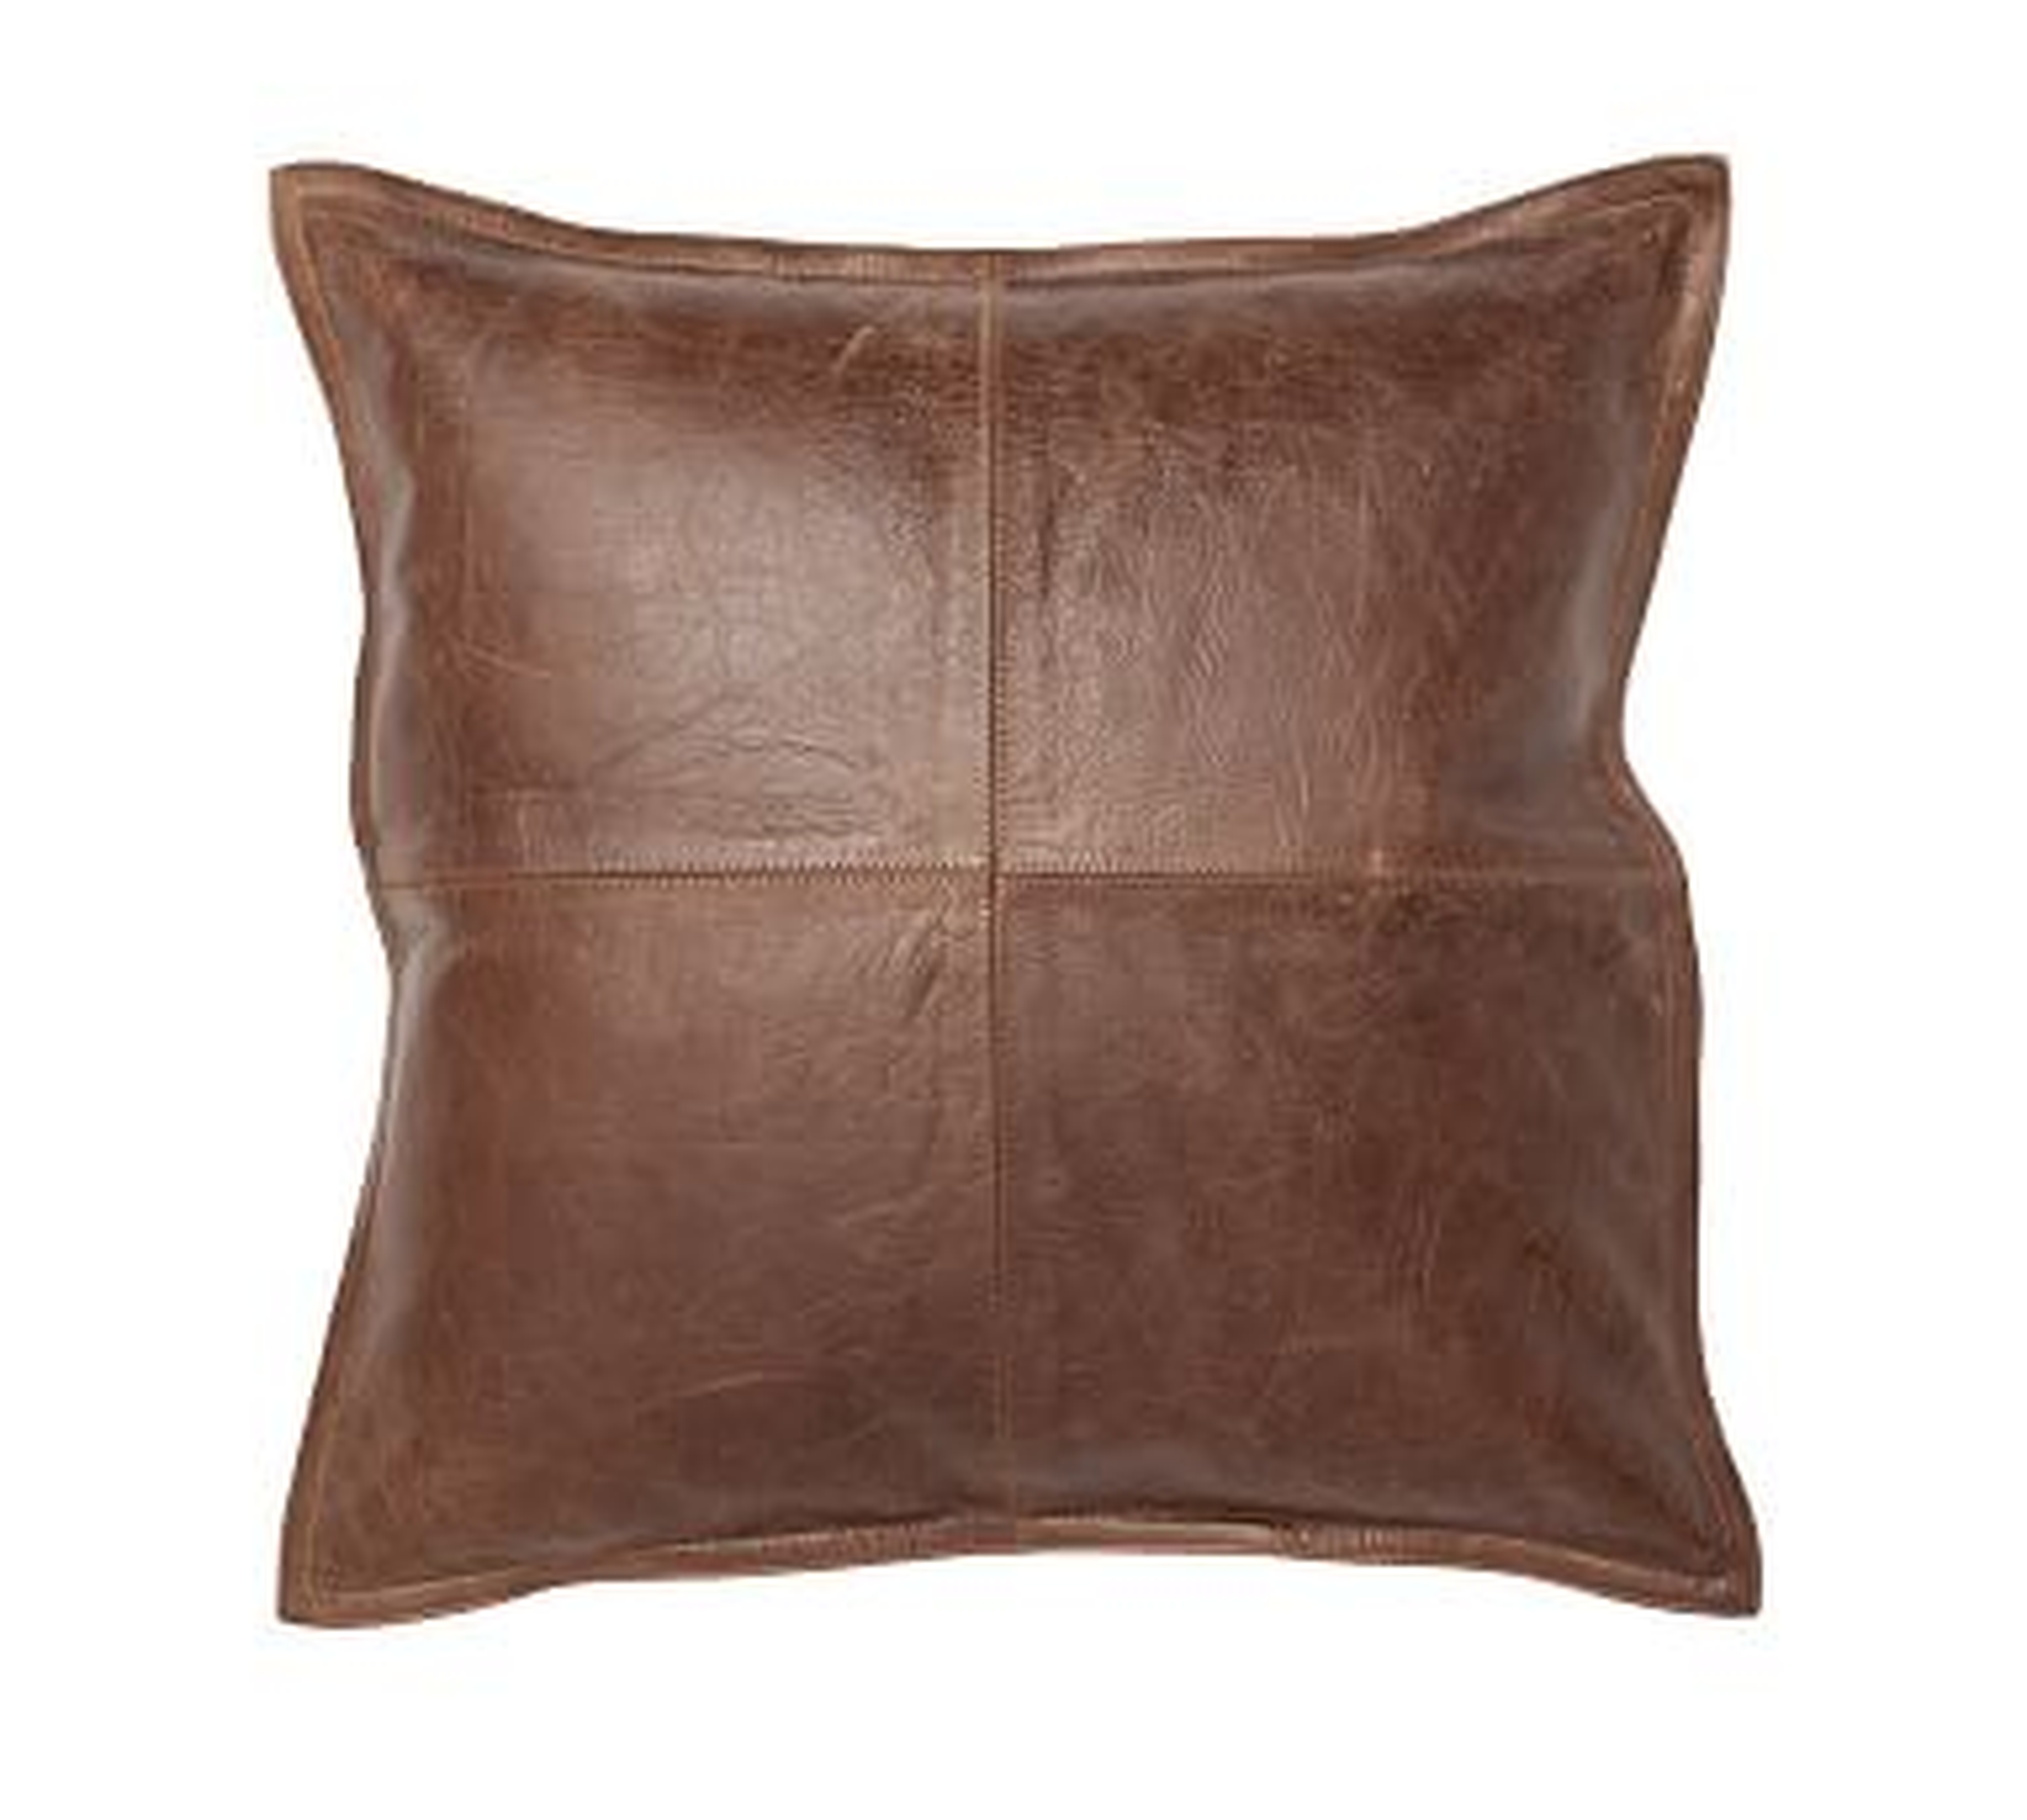 Pieced Leather Pillow Cover, Whiskey - Pottery Barn